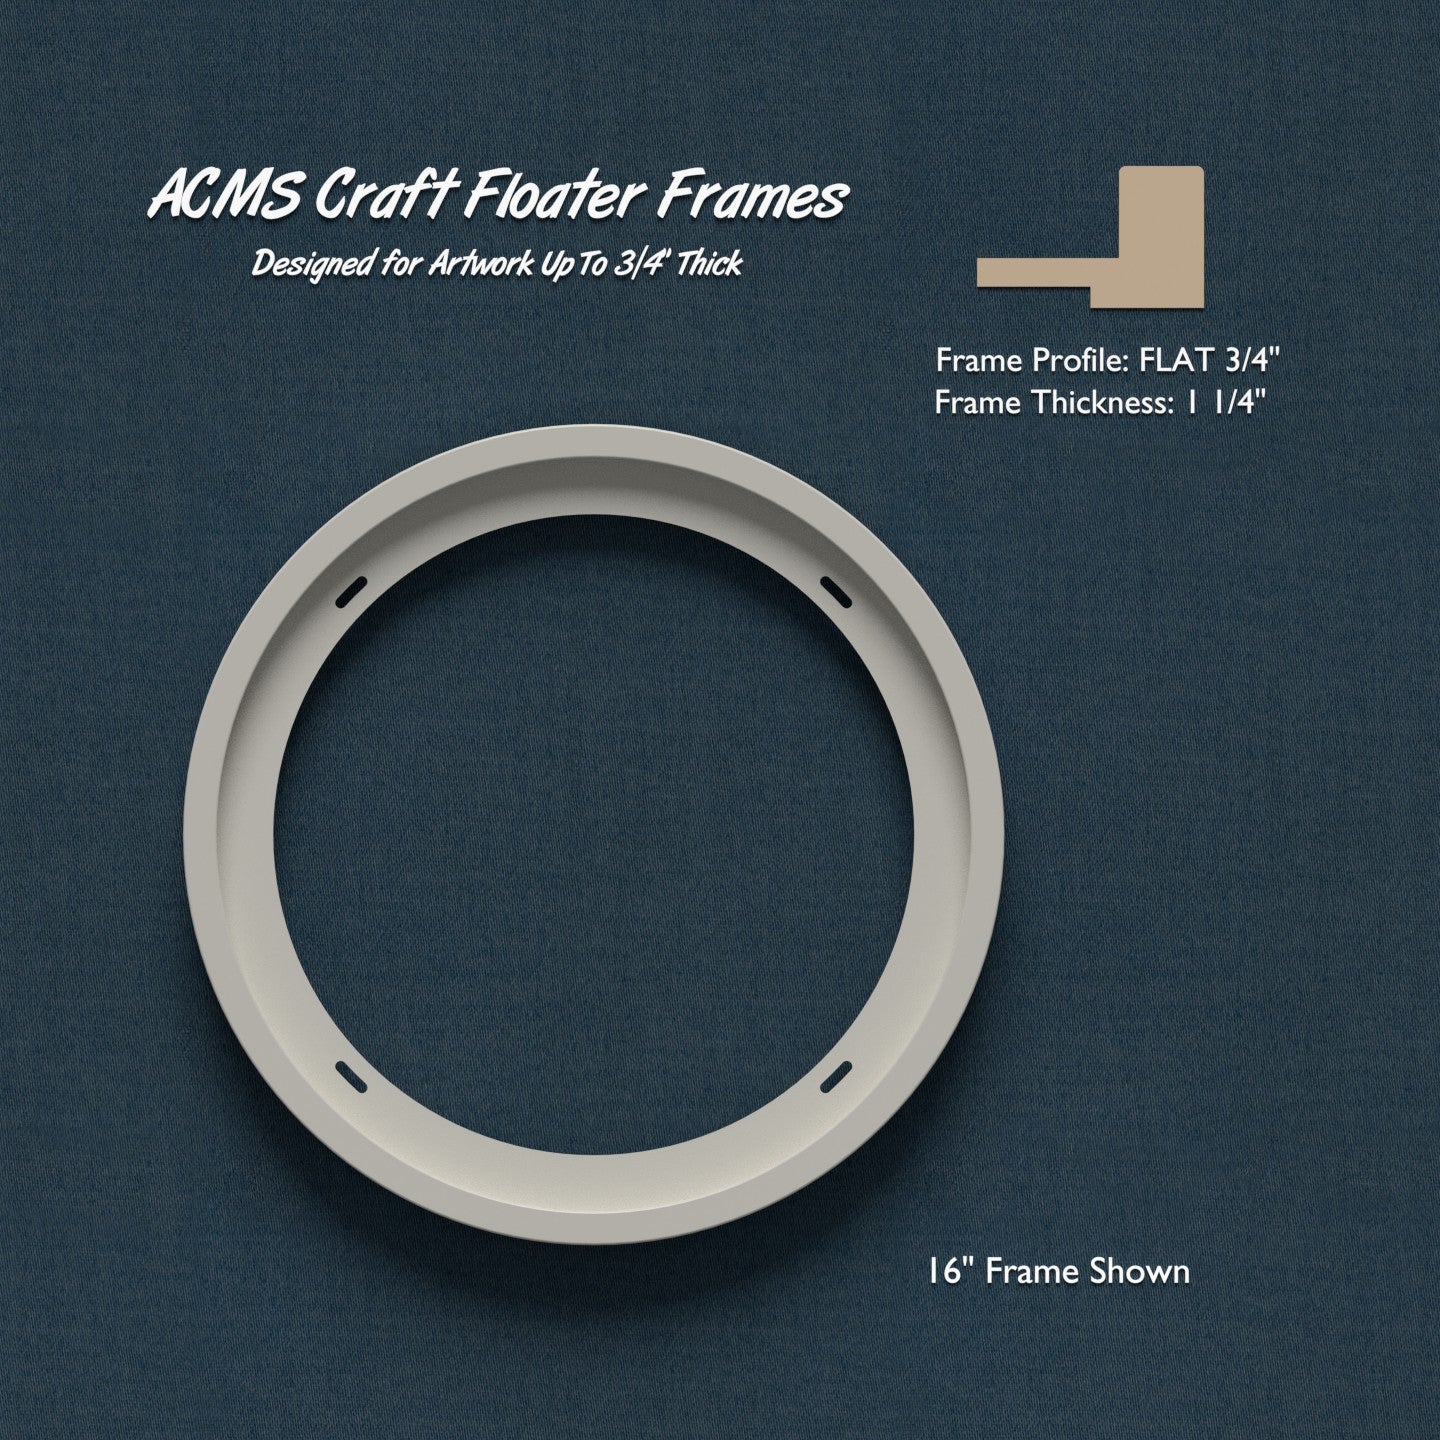 Round Craft Floater Frame - FLAT 3/4" Profile - 1 1/4" Thick